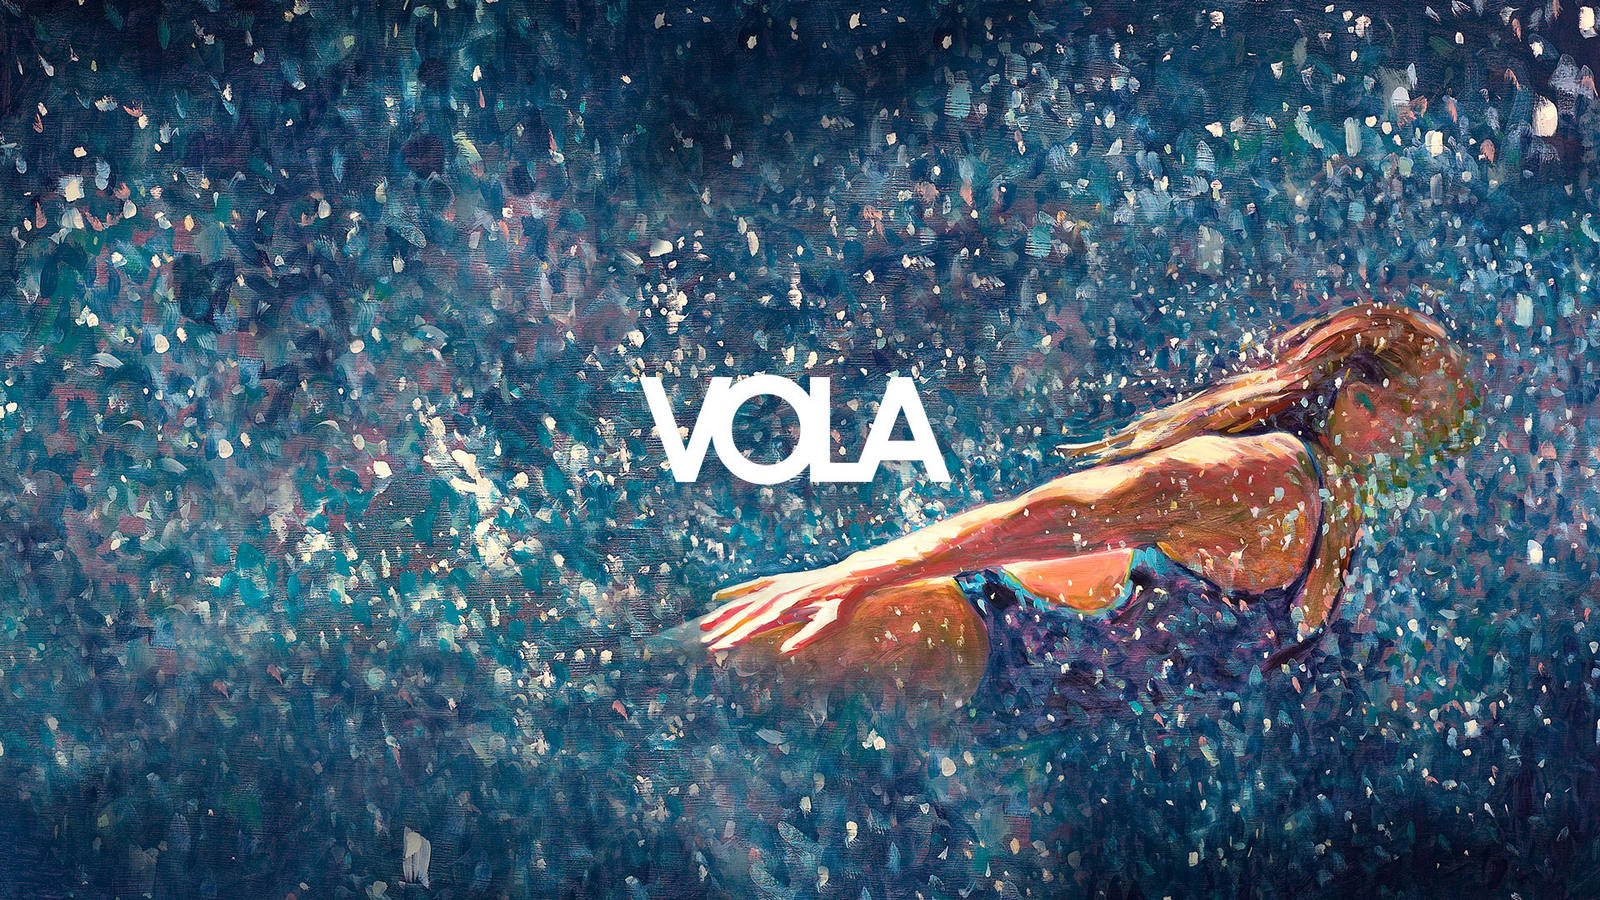 VOLA to Collect an Applause of 21 Crowds on Upcoming European Tour